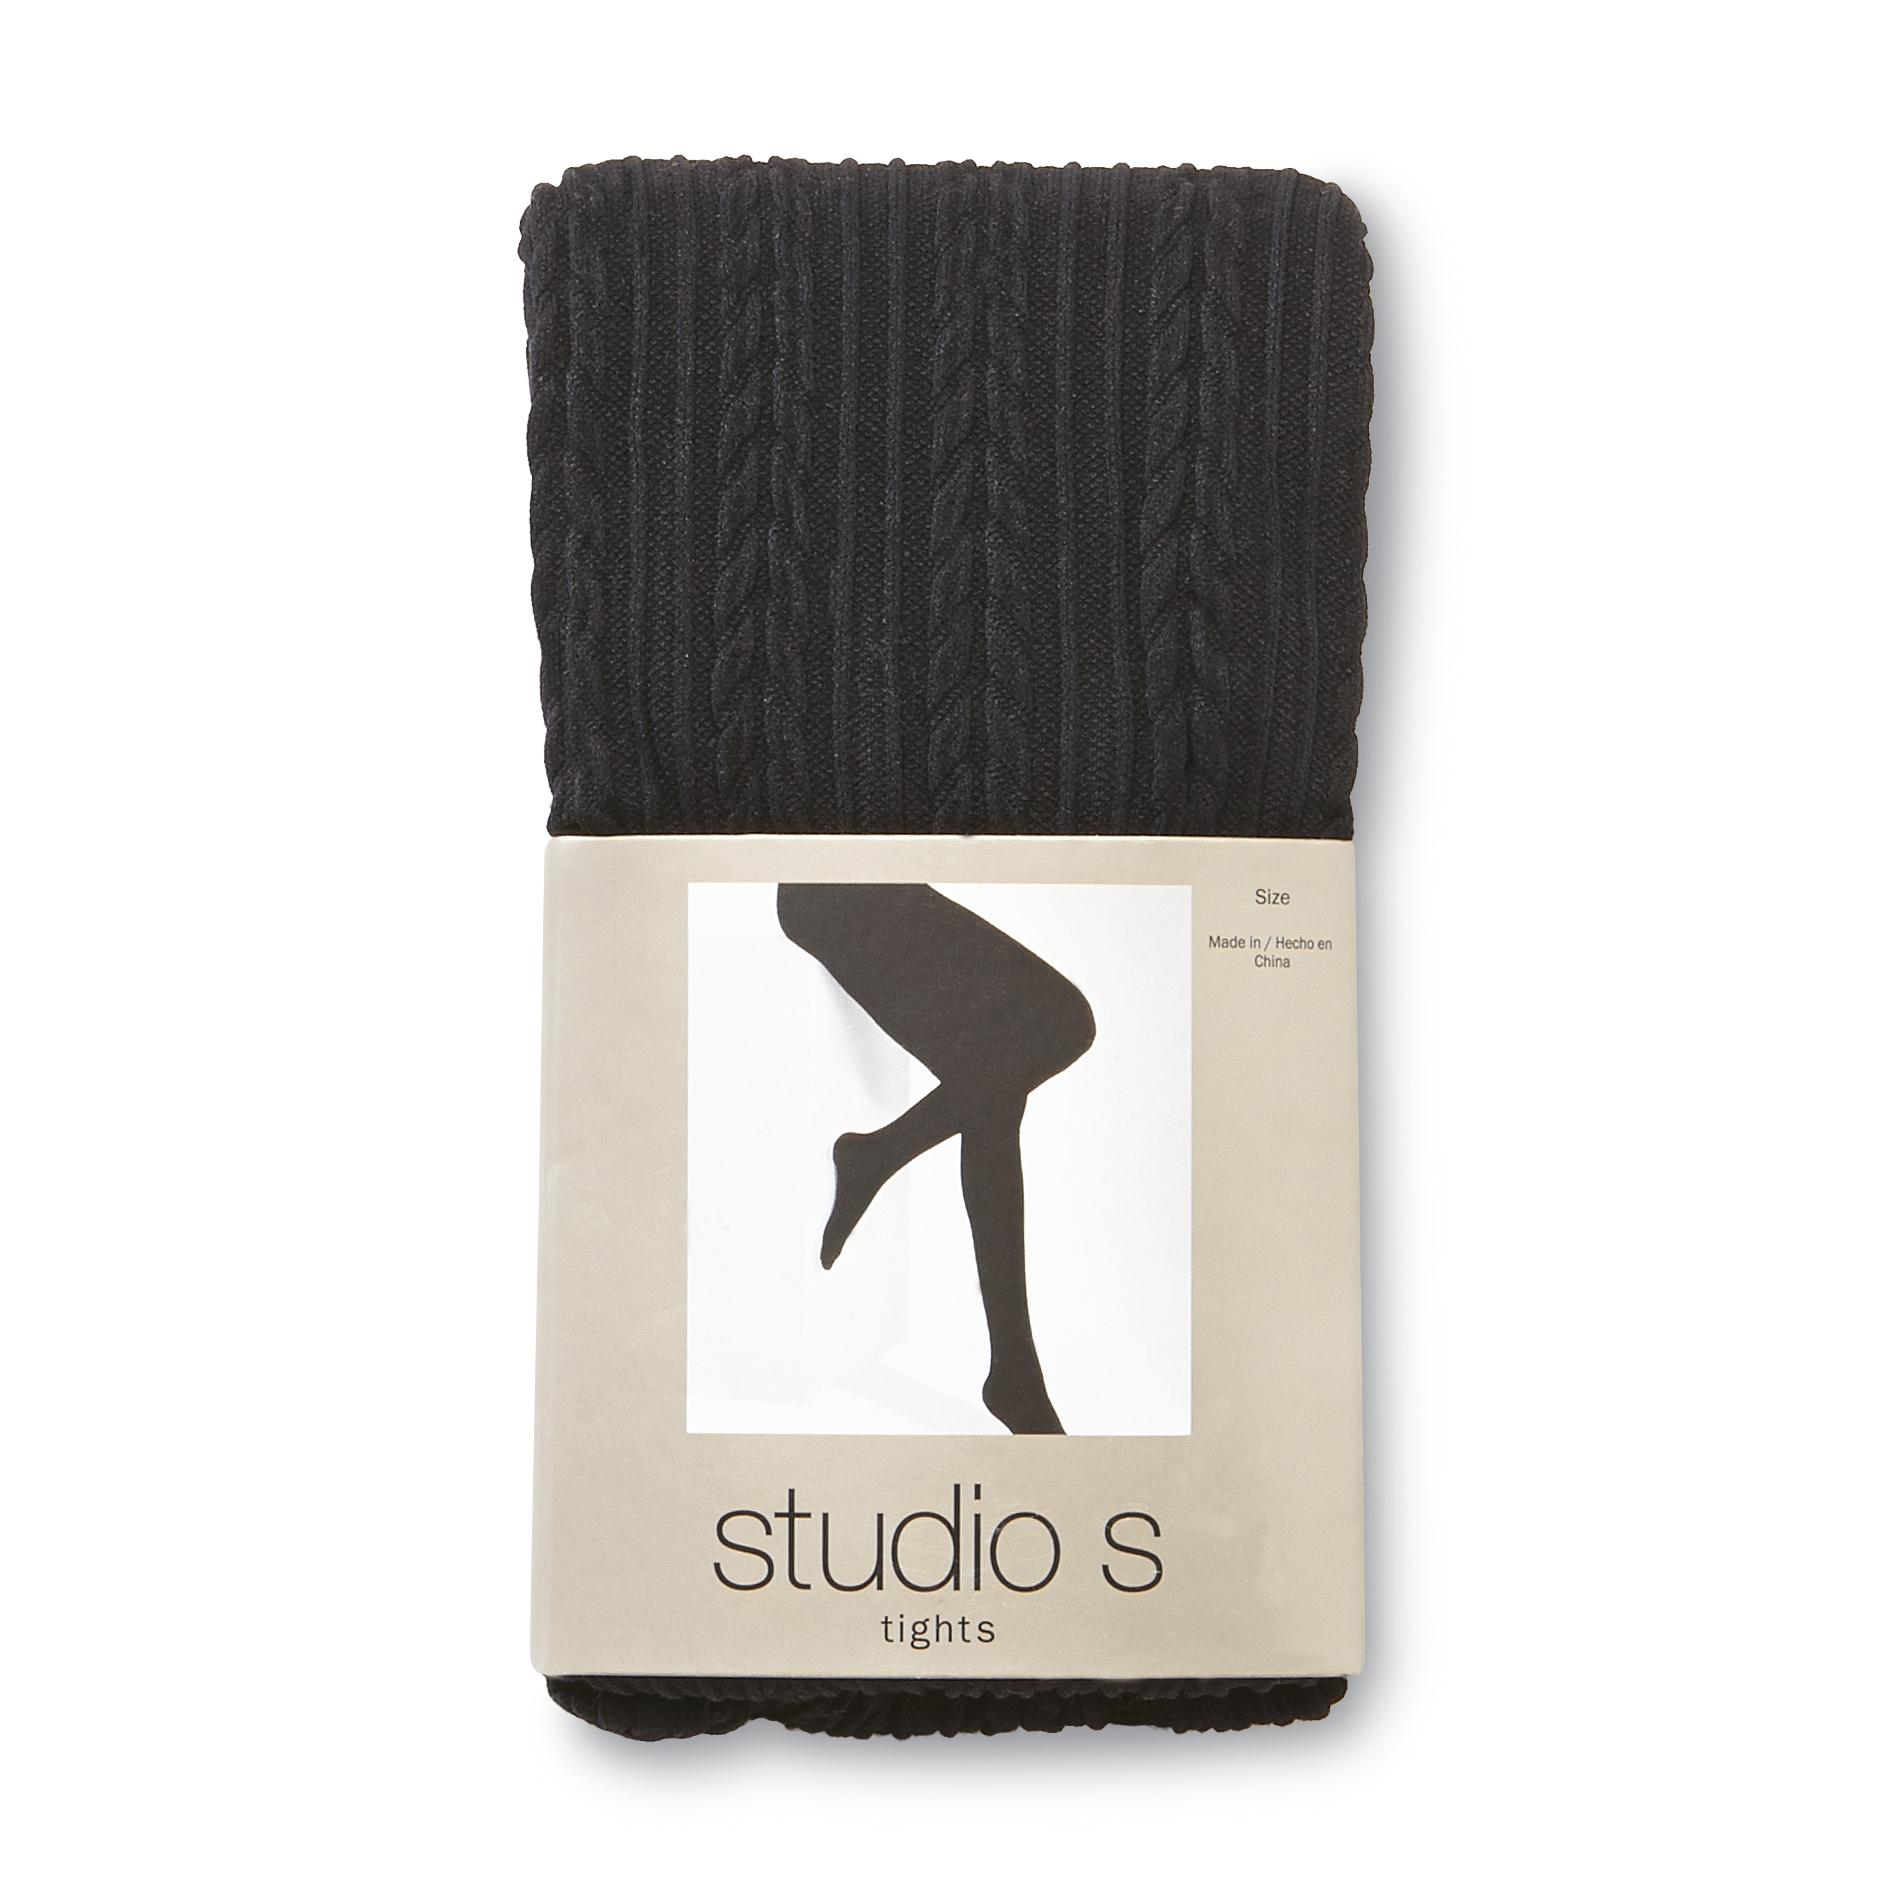 Studio S Women's Tights - Textured Cable Knit